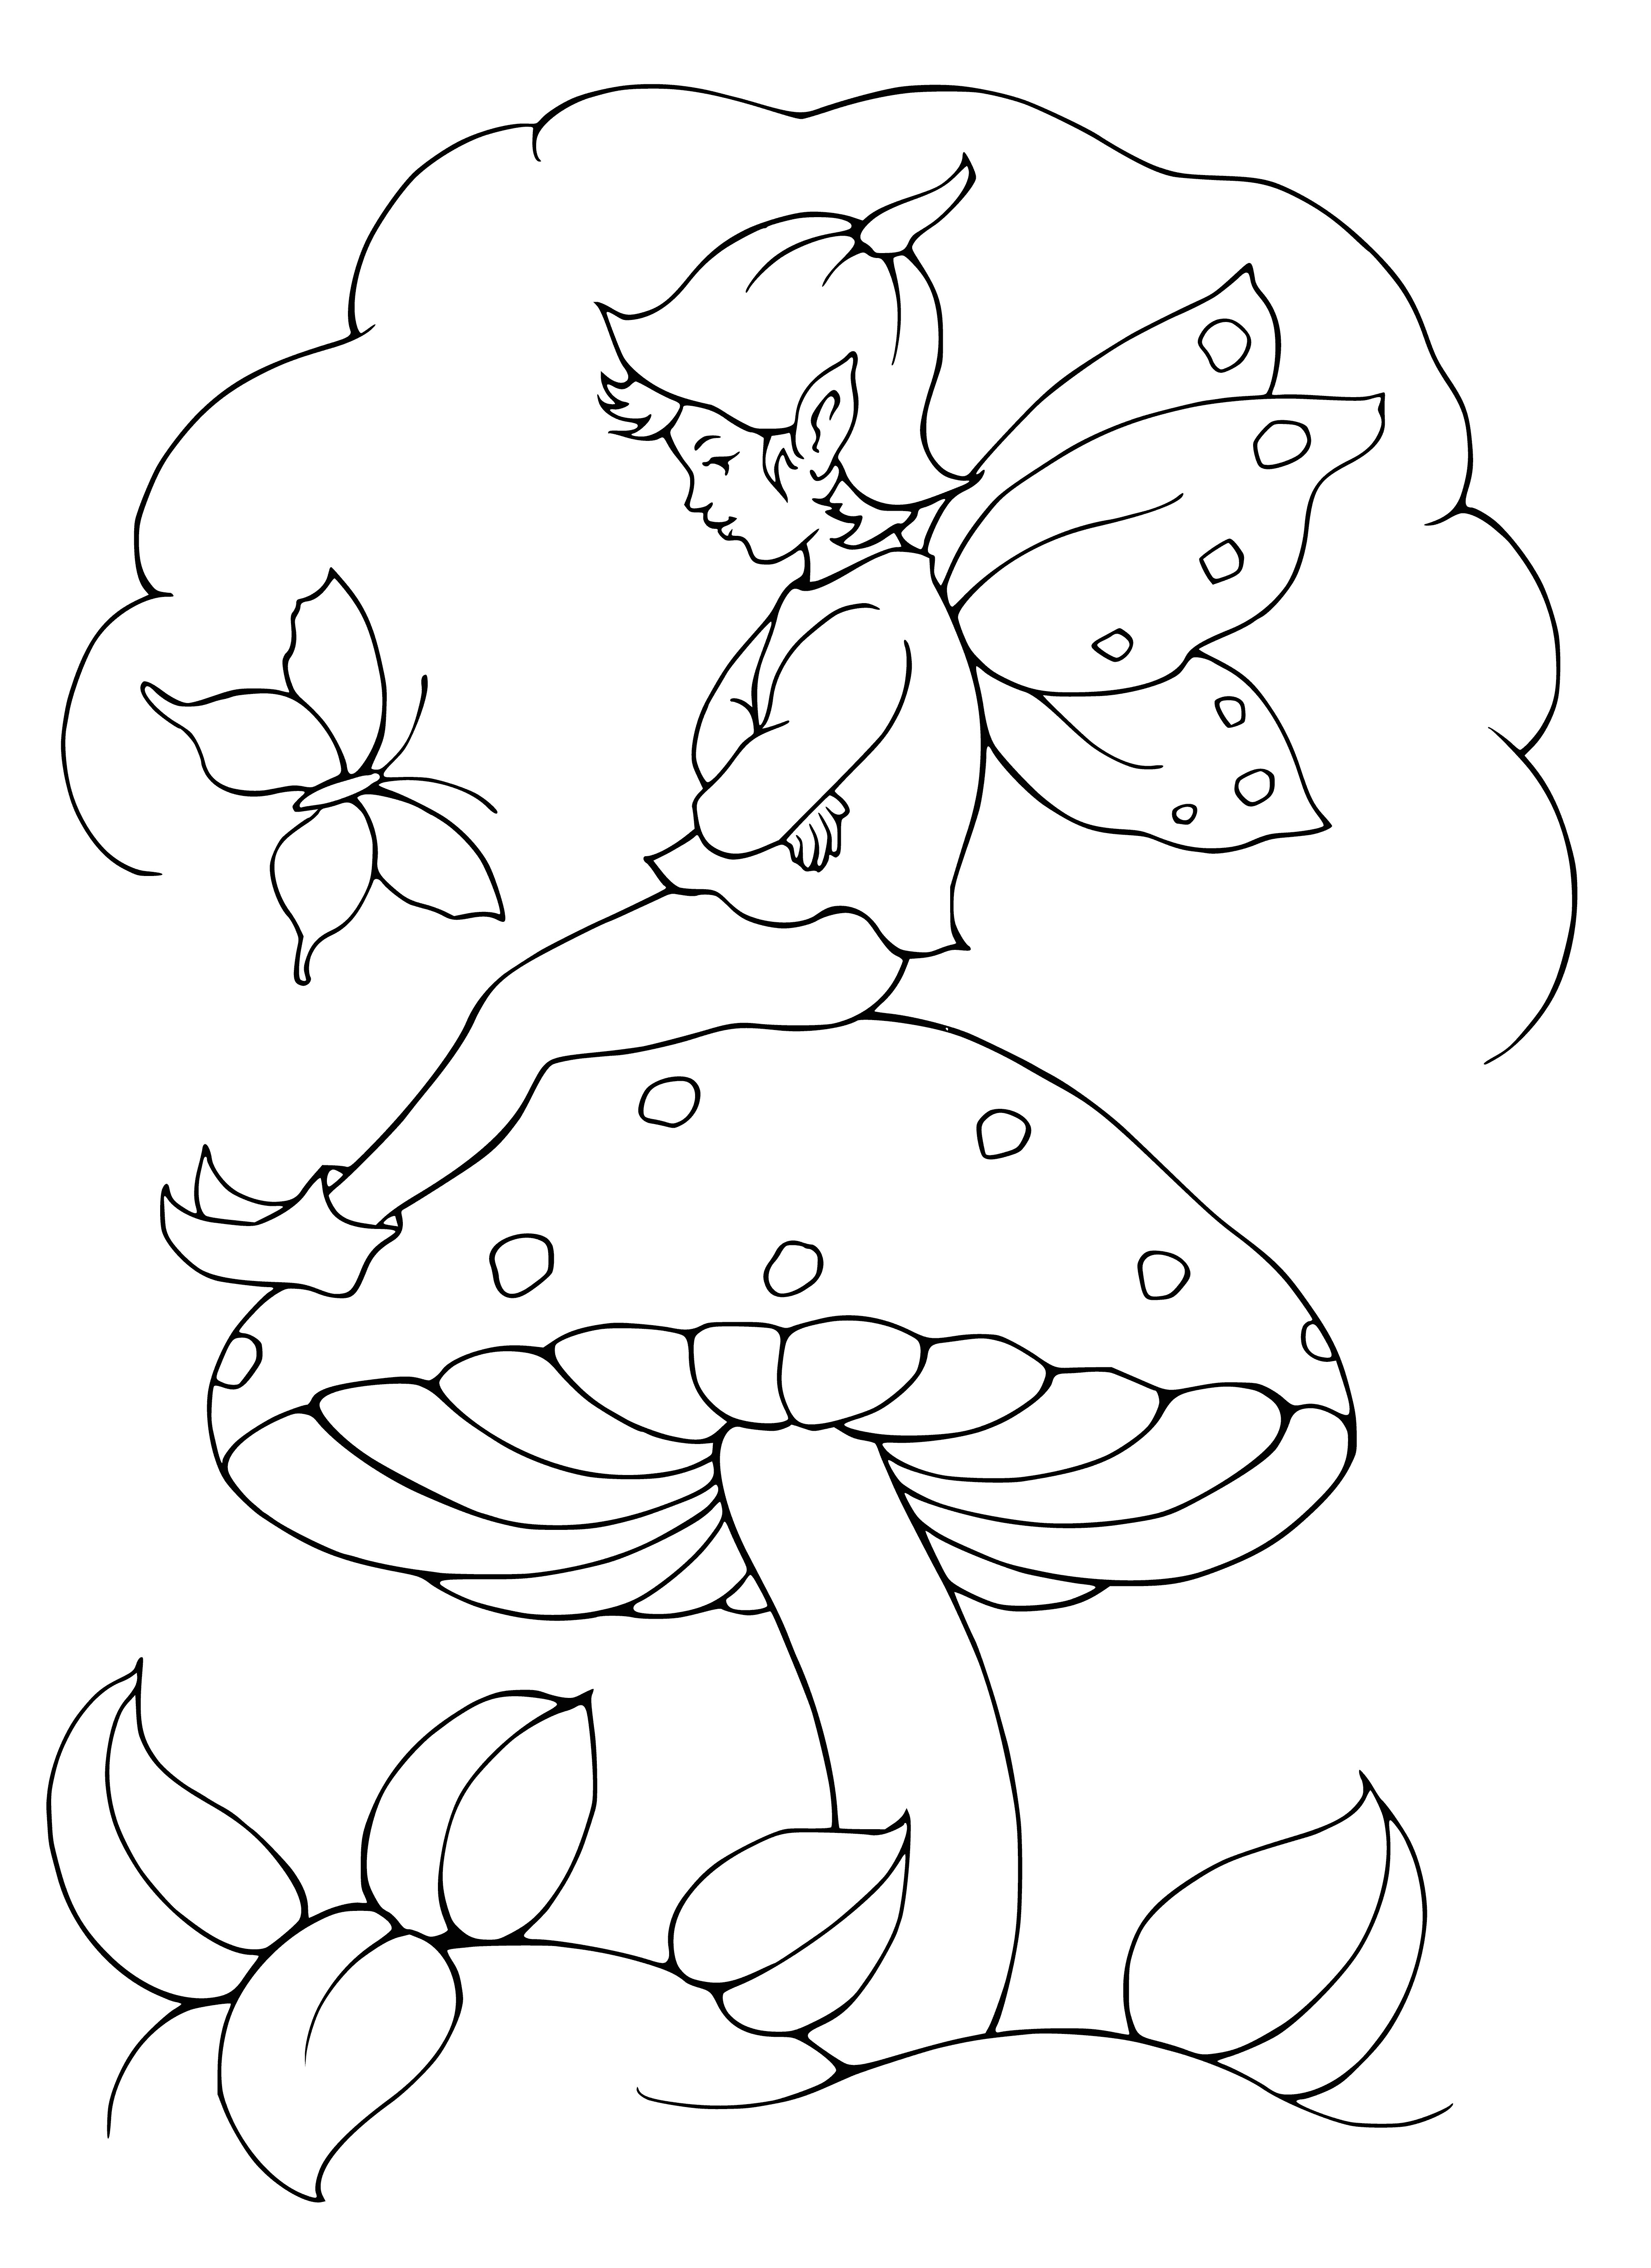 coloring page: Elf sits on a mushroom, pointy ears and long hair blowing in the wind, wearing green and brown, looks very happy.